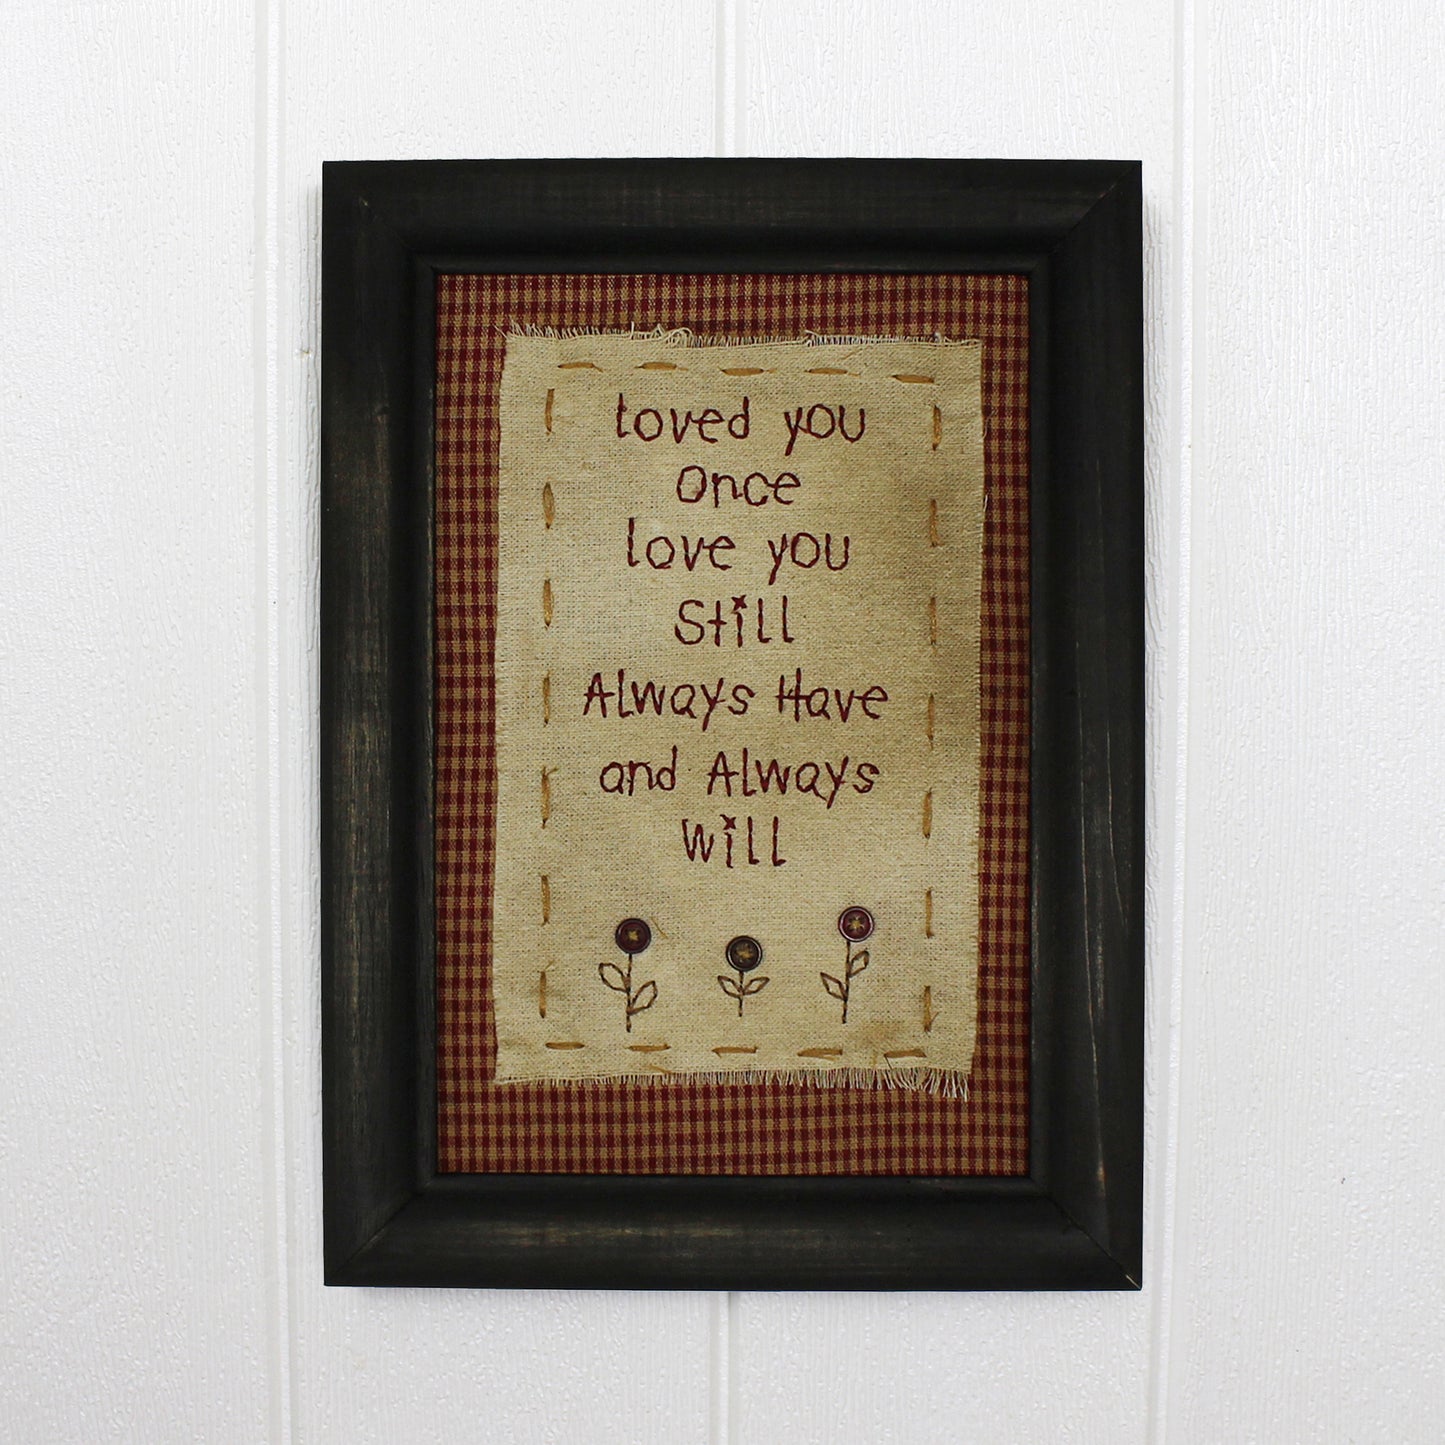 CVHOMEDECO. Primitives Antique Loved You Once, Love You Still, Always Have and Always Will Stitchery Frame Wall Mounted Hanging Decor Art, 8 x 11 Inch